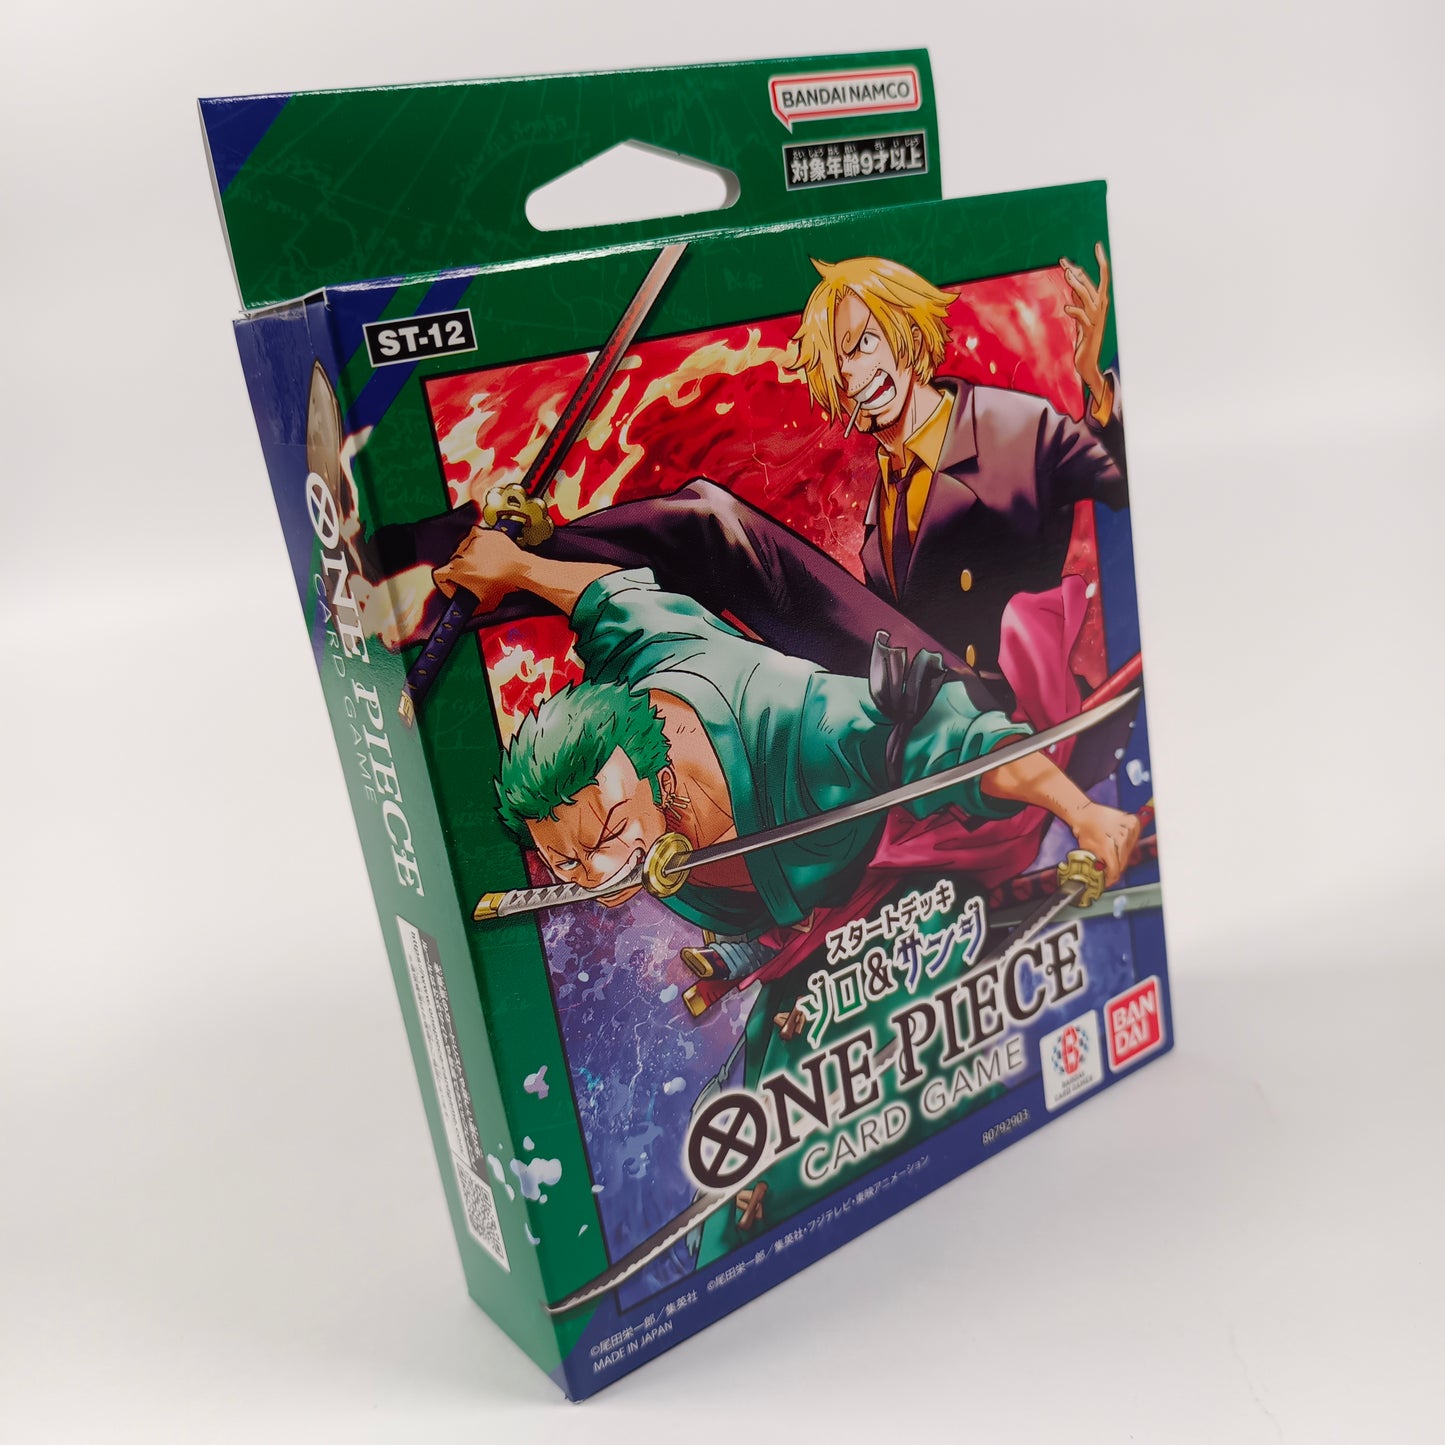 ONE PIECE CARD GAME ST-12